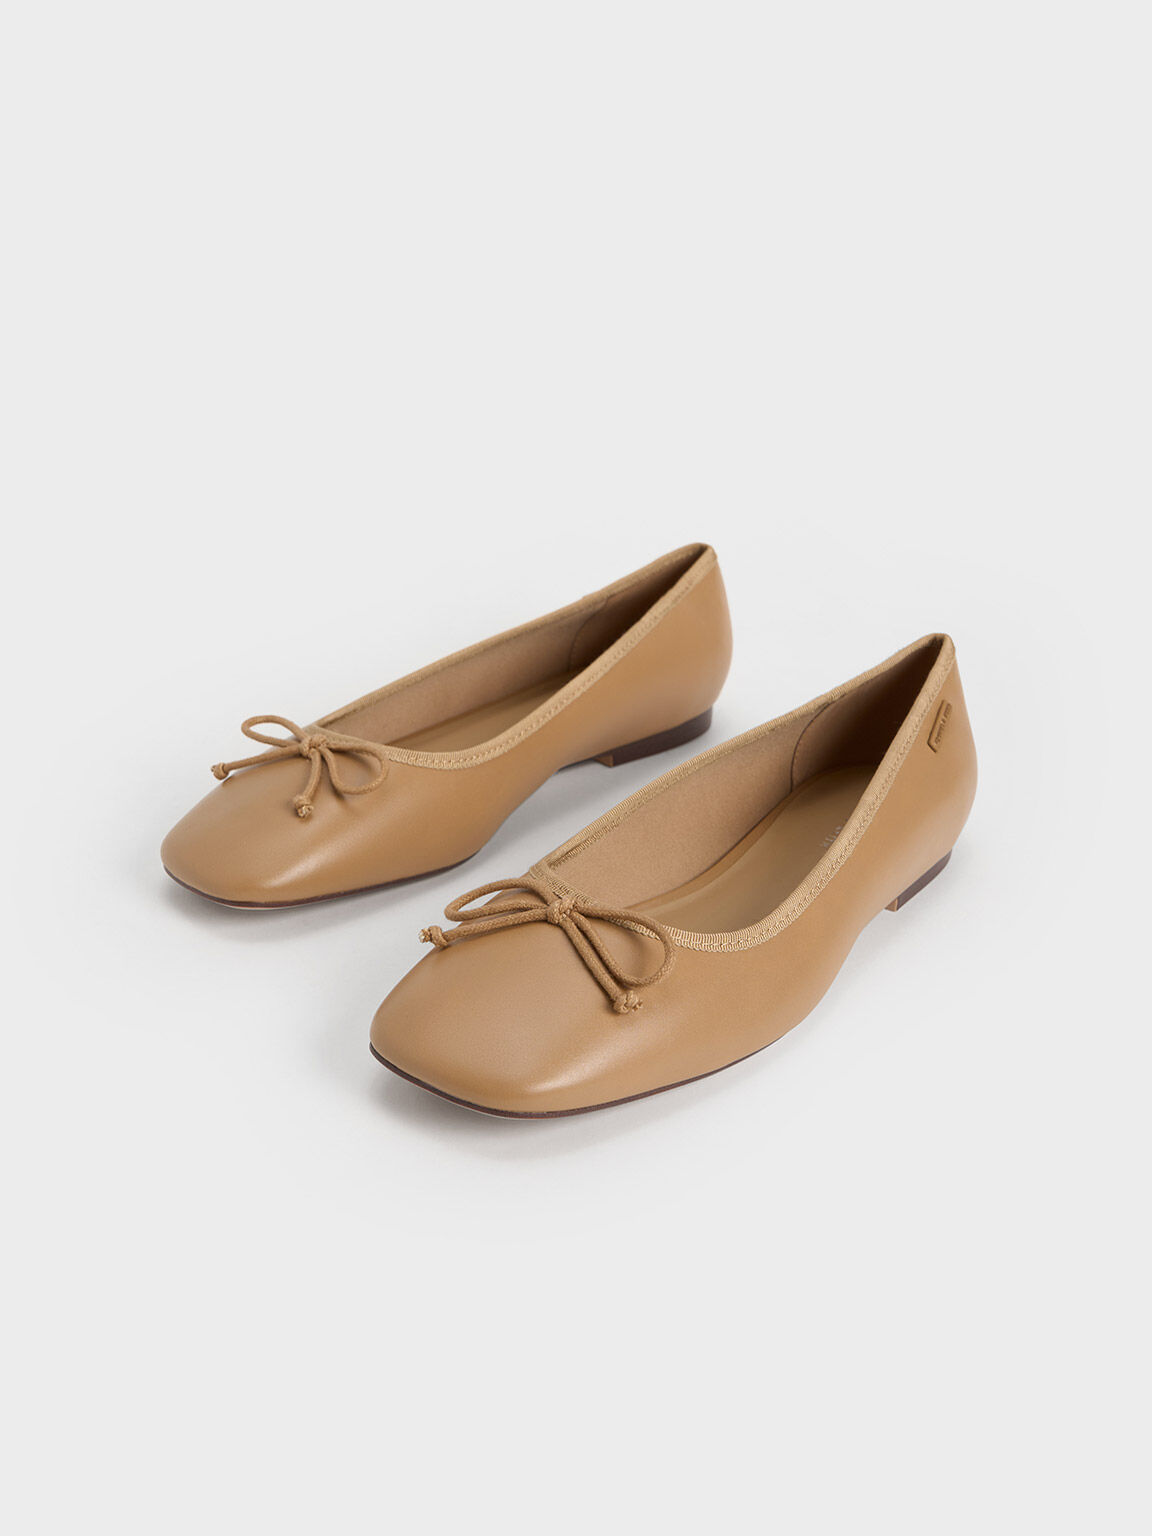 Rounded Square-Toe Bow Ballerinas, Camel, hi-res